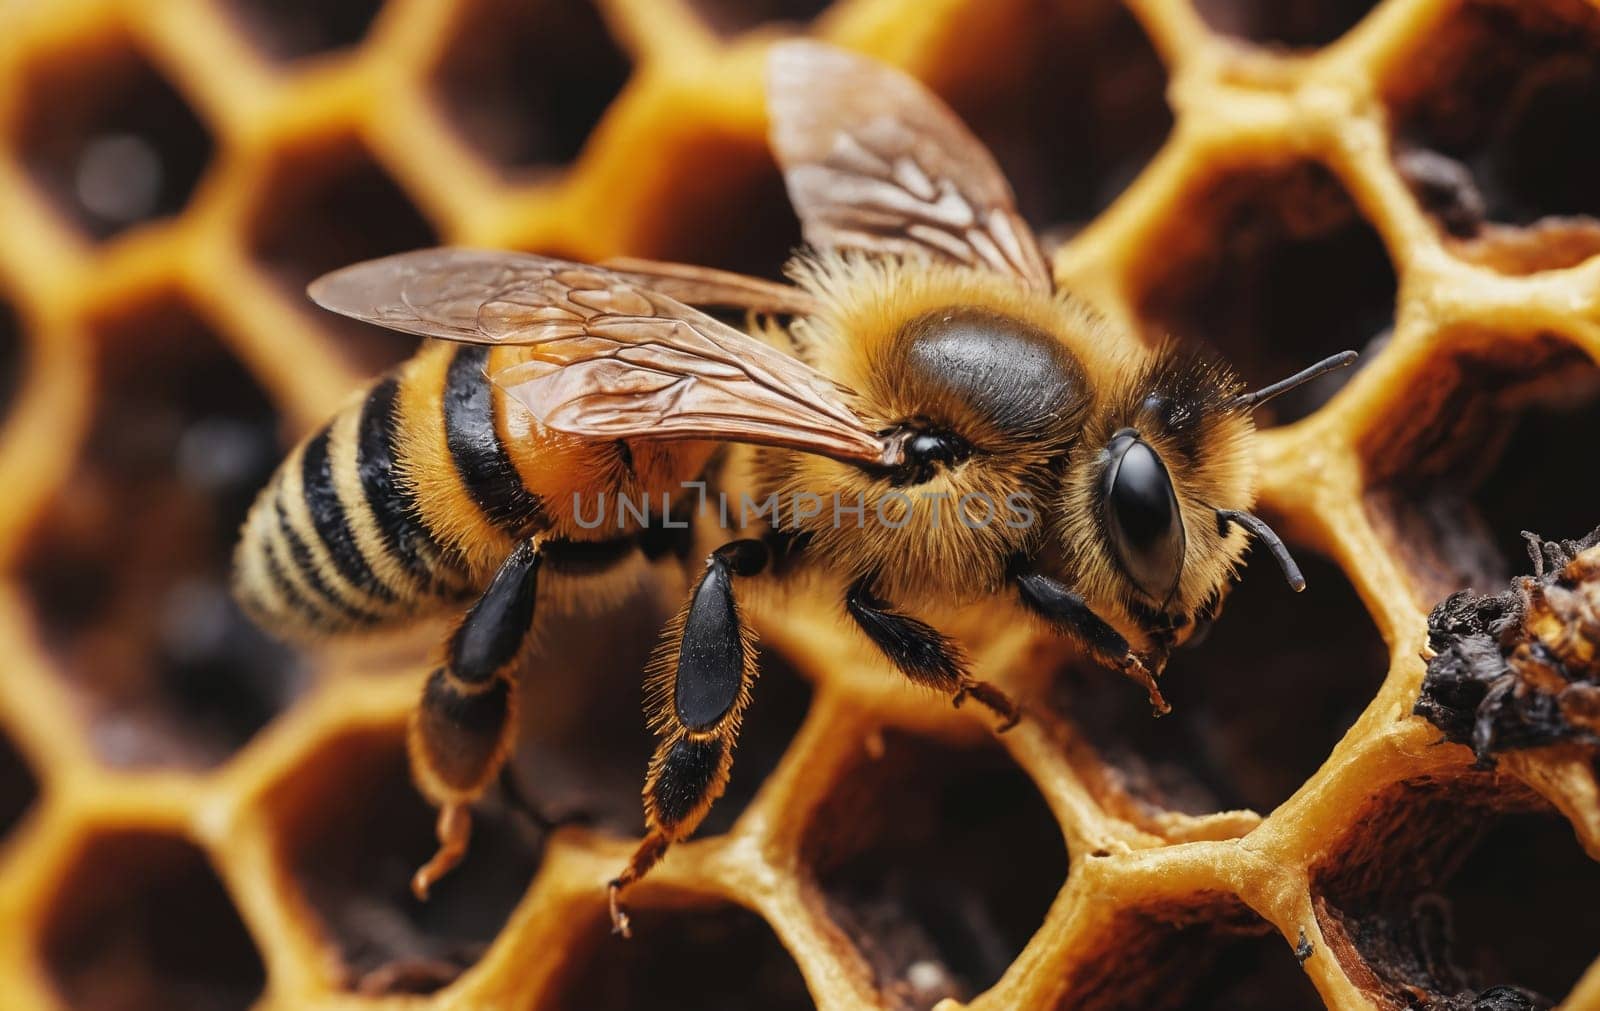 A close up of a bee pollinating on a honeycomb, showcasing the intricate natural material created by honeybees. The bee, an arthropod organism, plays a crucial role as a pollinator in the beehive